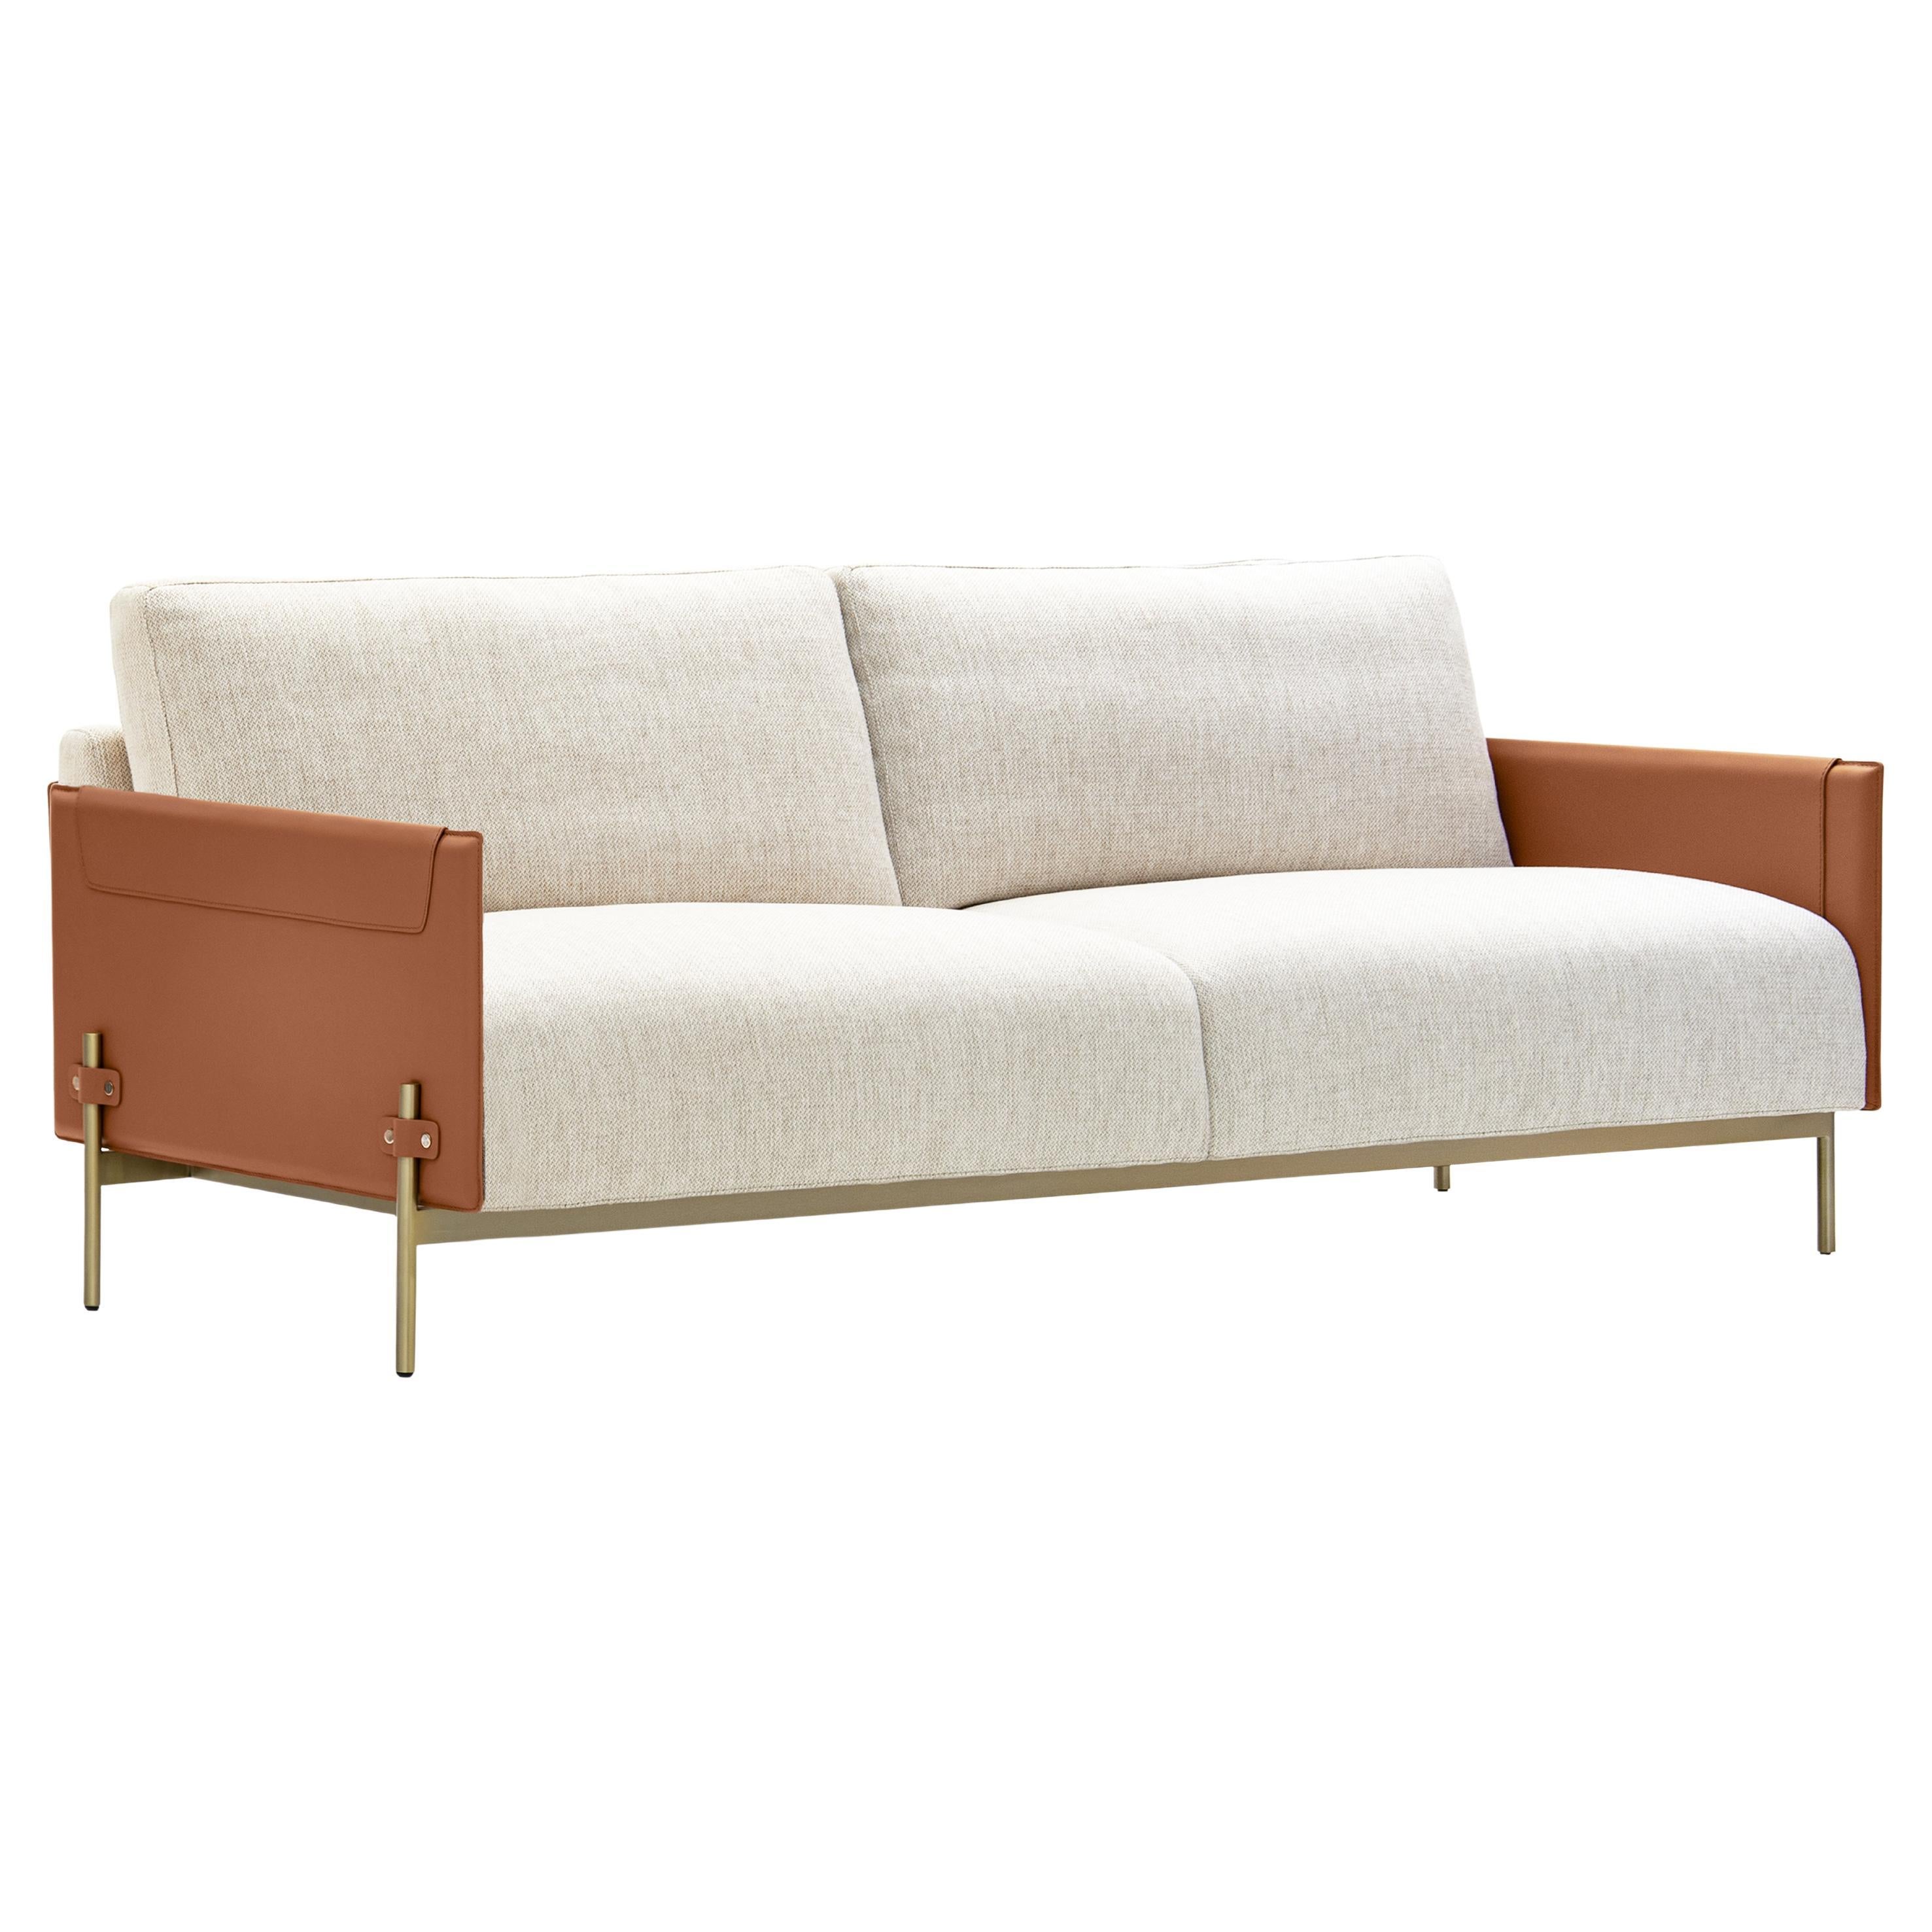 Contemporary Design, Iconic Sofa in Natural Saddle Leather V215  For Sale